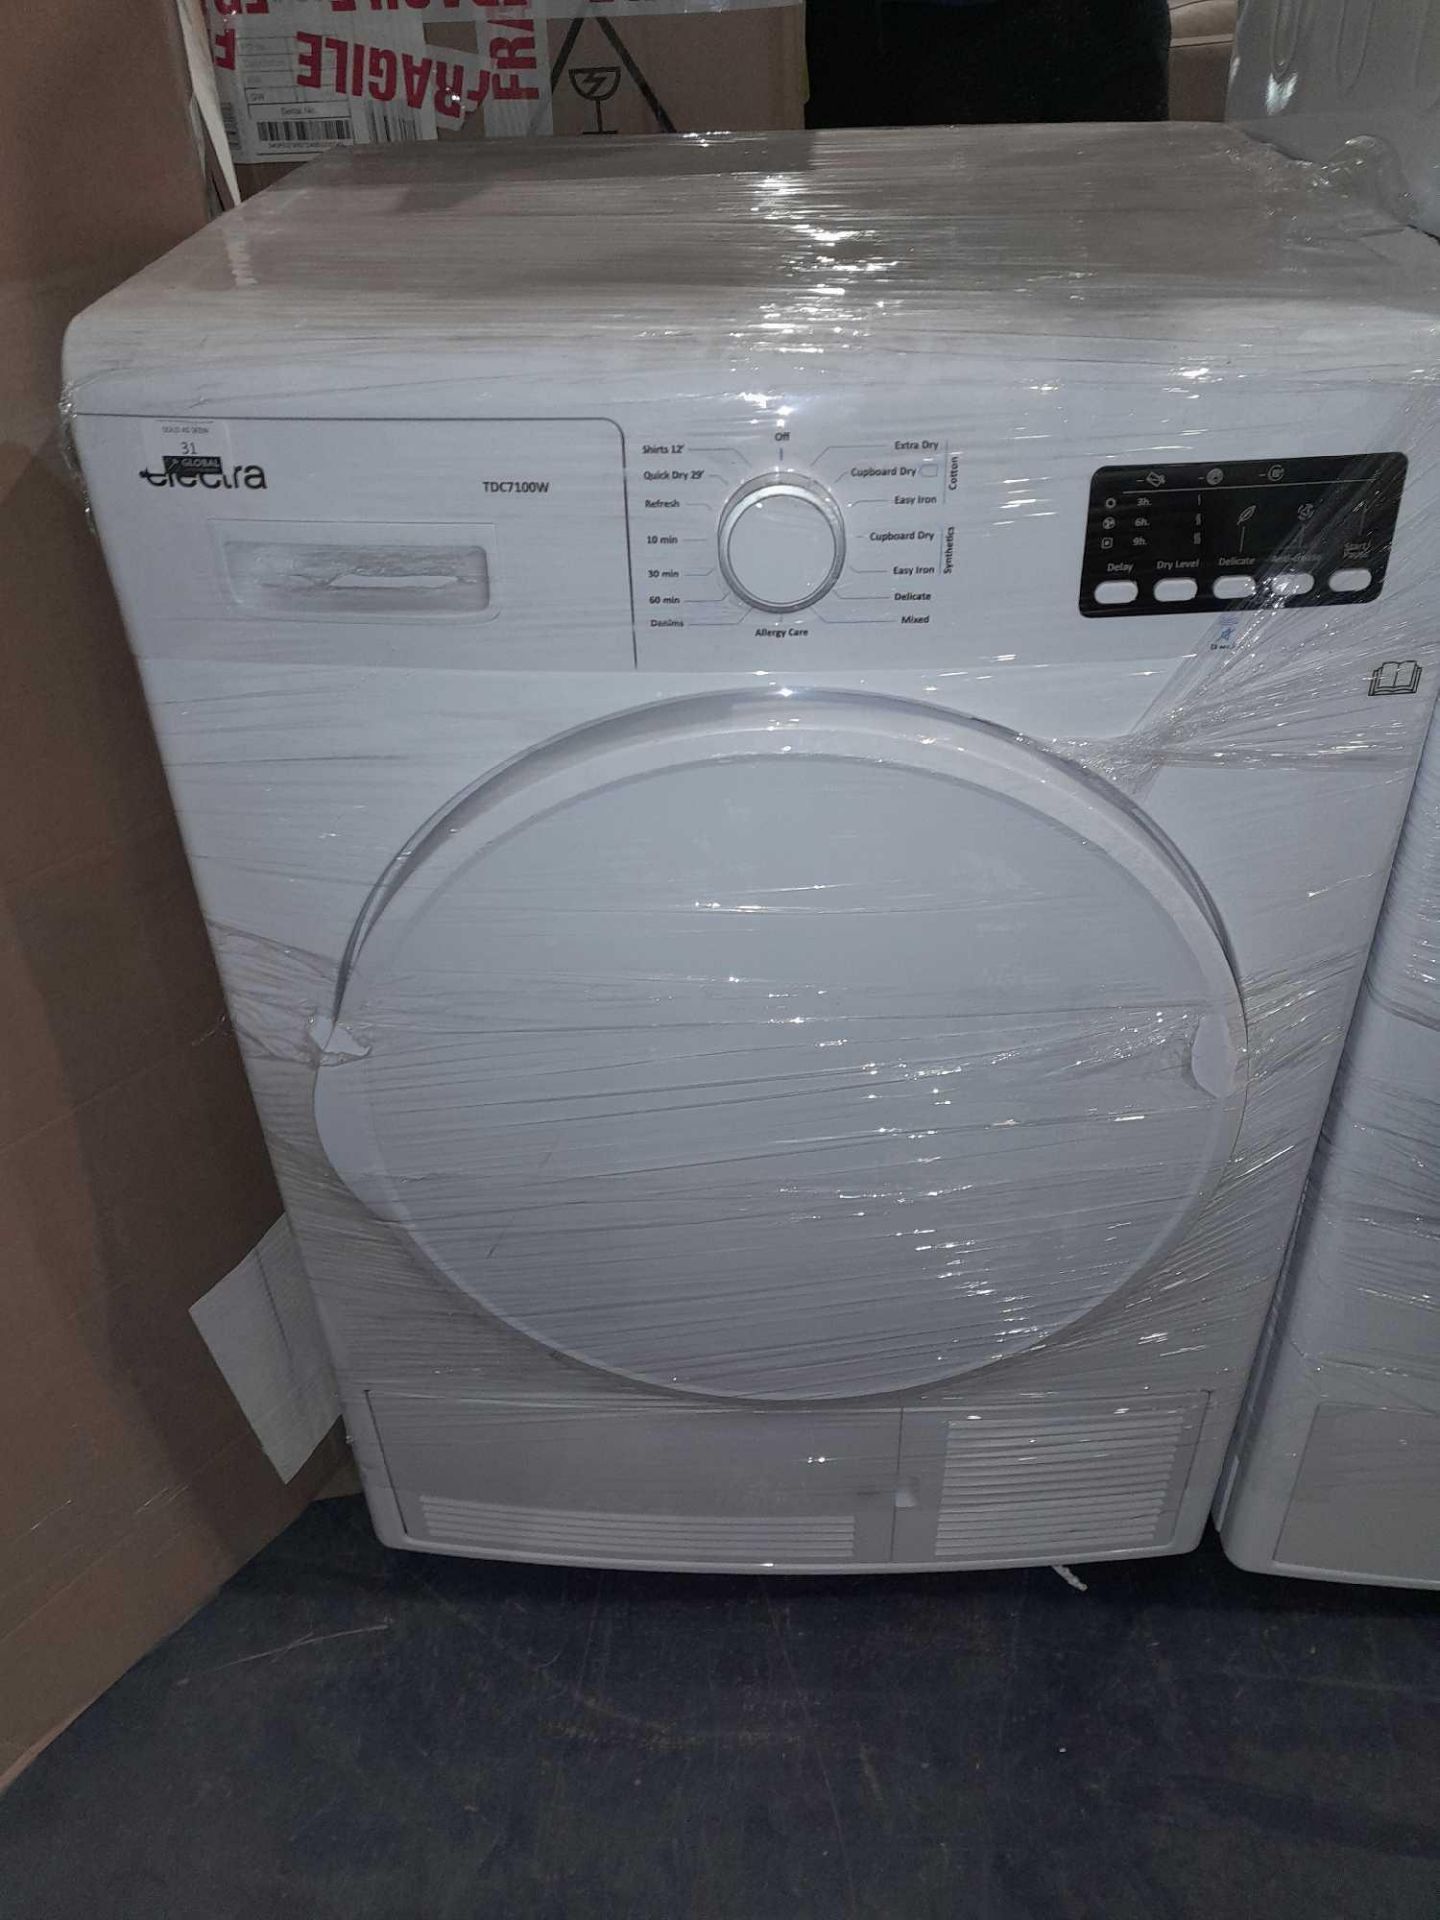 RRP £240 Lot Includes 1 Unboxed Electra Tdc7100W Washing Machine(Untested)(H) - Image 2 of 2